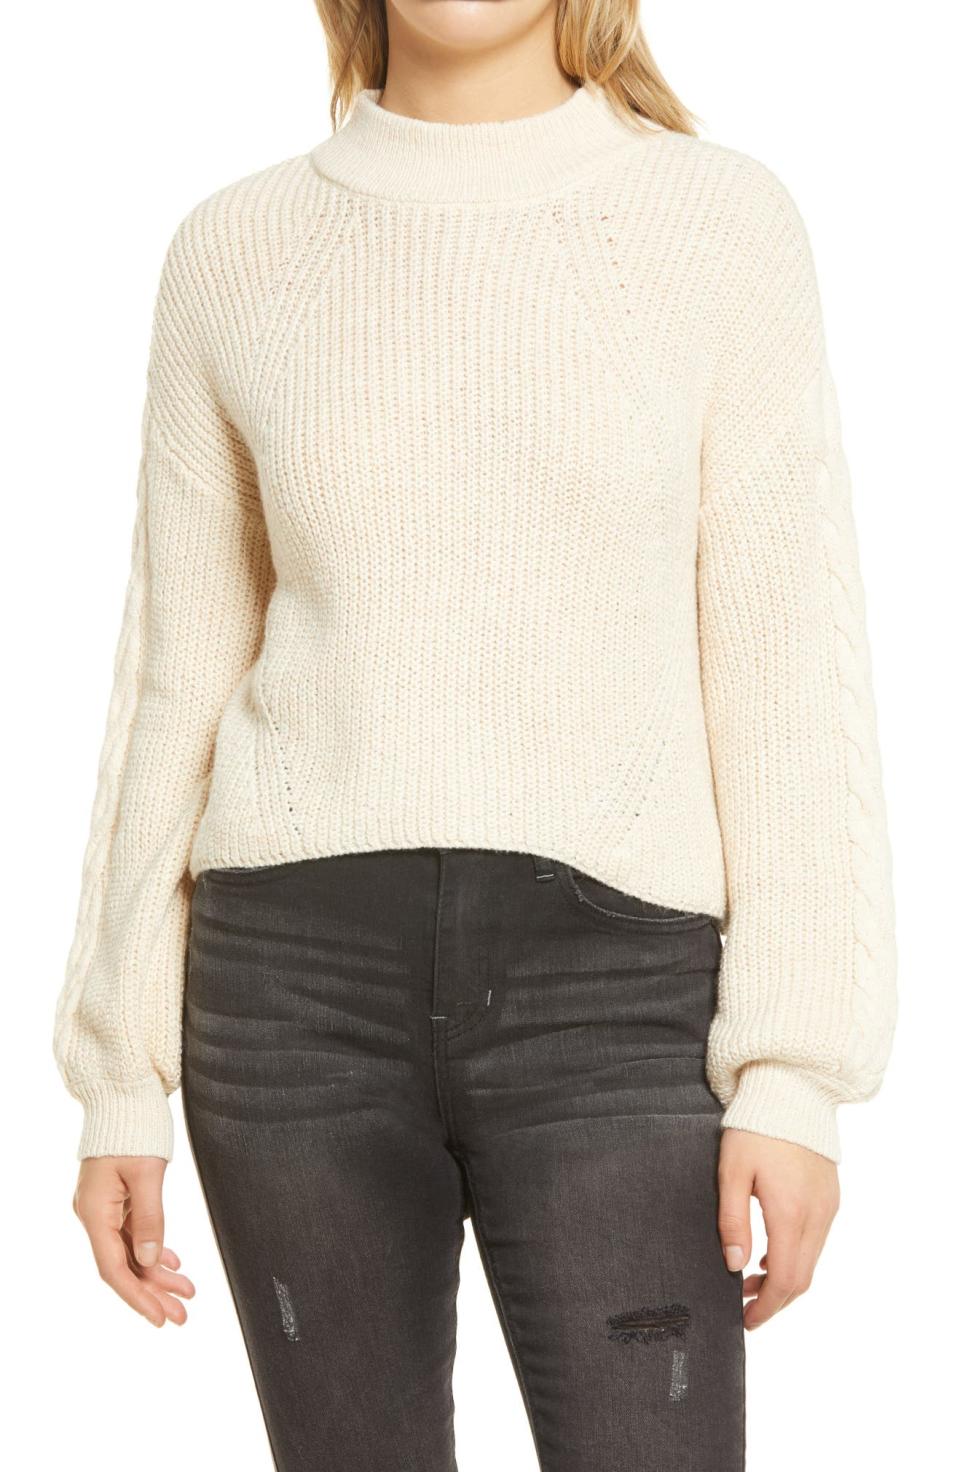 BP. Cable Knit Balloon Sleeve Sweater. Image via Nordstrom.